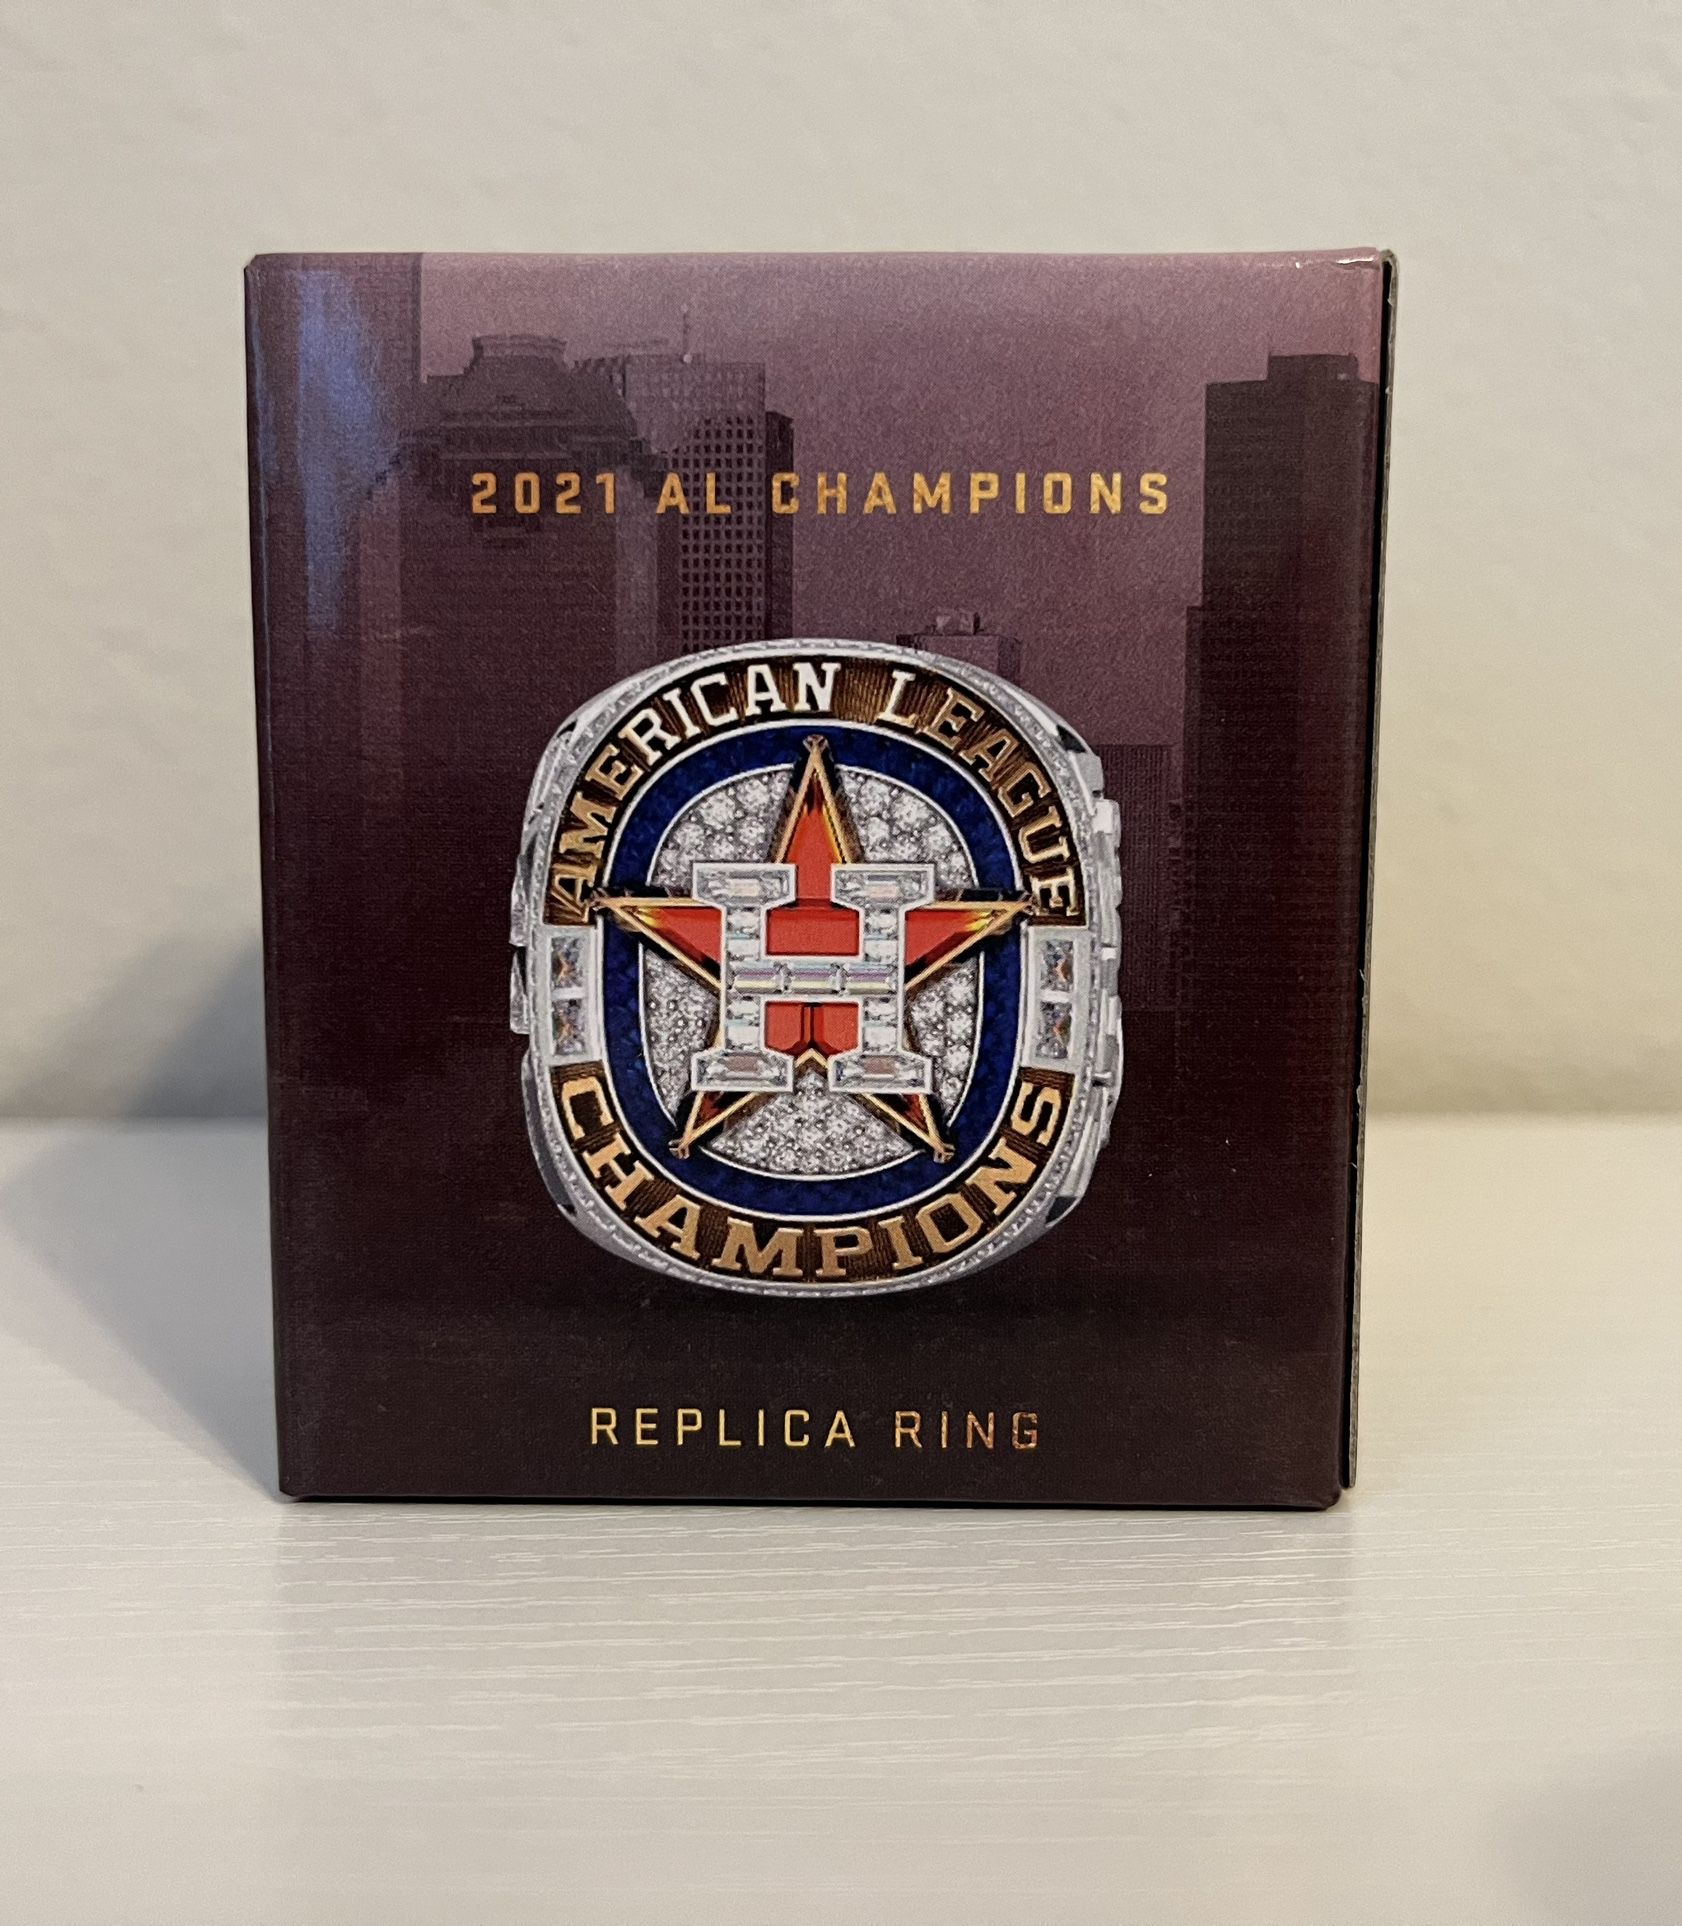 Houston Astros 2021 ALCS Replica Championship Ring for Sale in Cypress, TX  - OfferUp